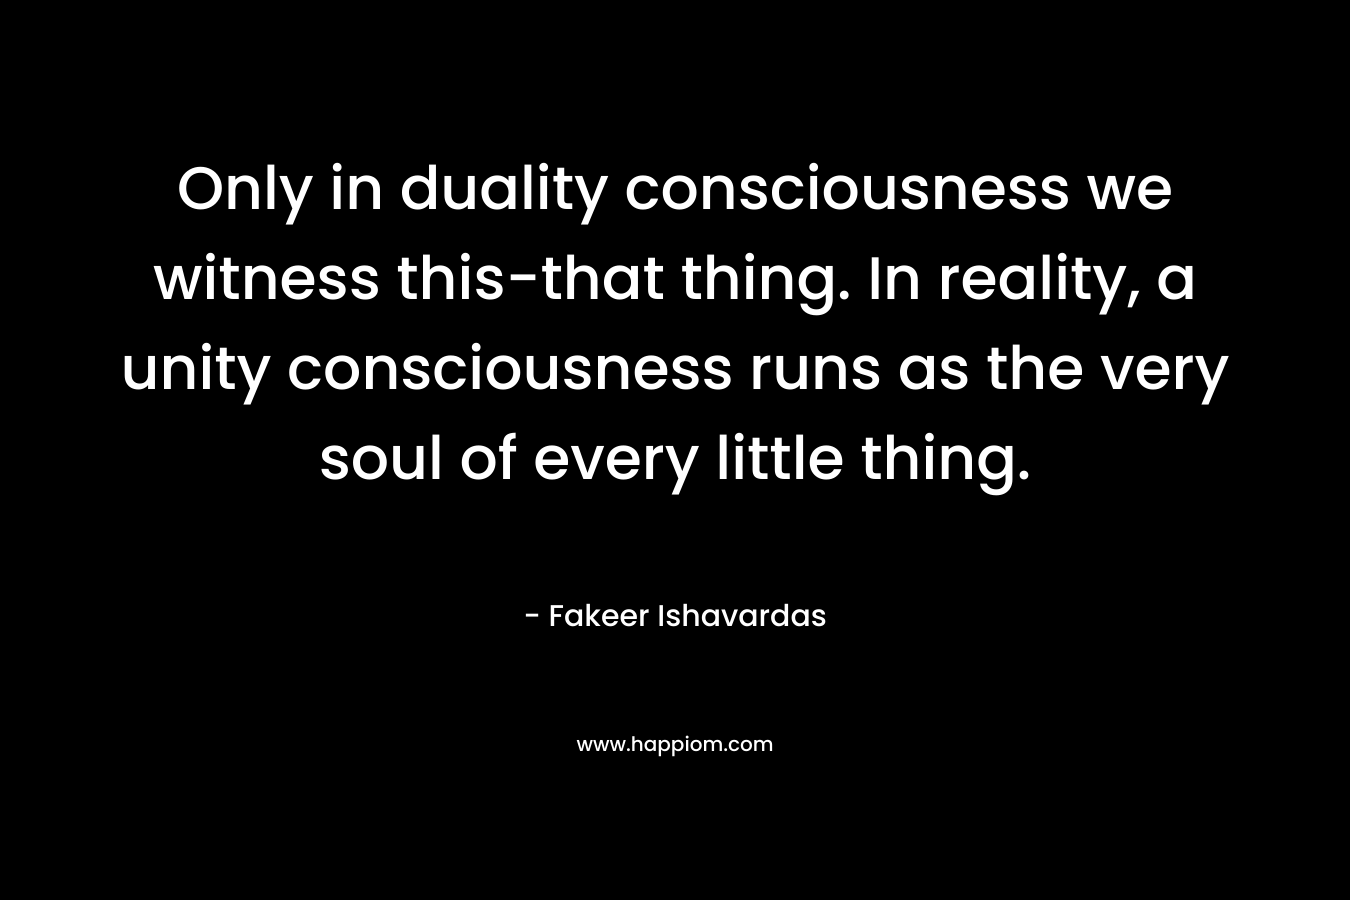 Only in duality consciousness we witness this-that thing. In reality, a unity consciousness runs as the very soul of every little thing. – Fakeer Ishavardas